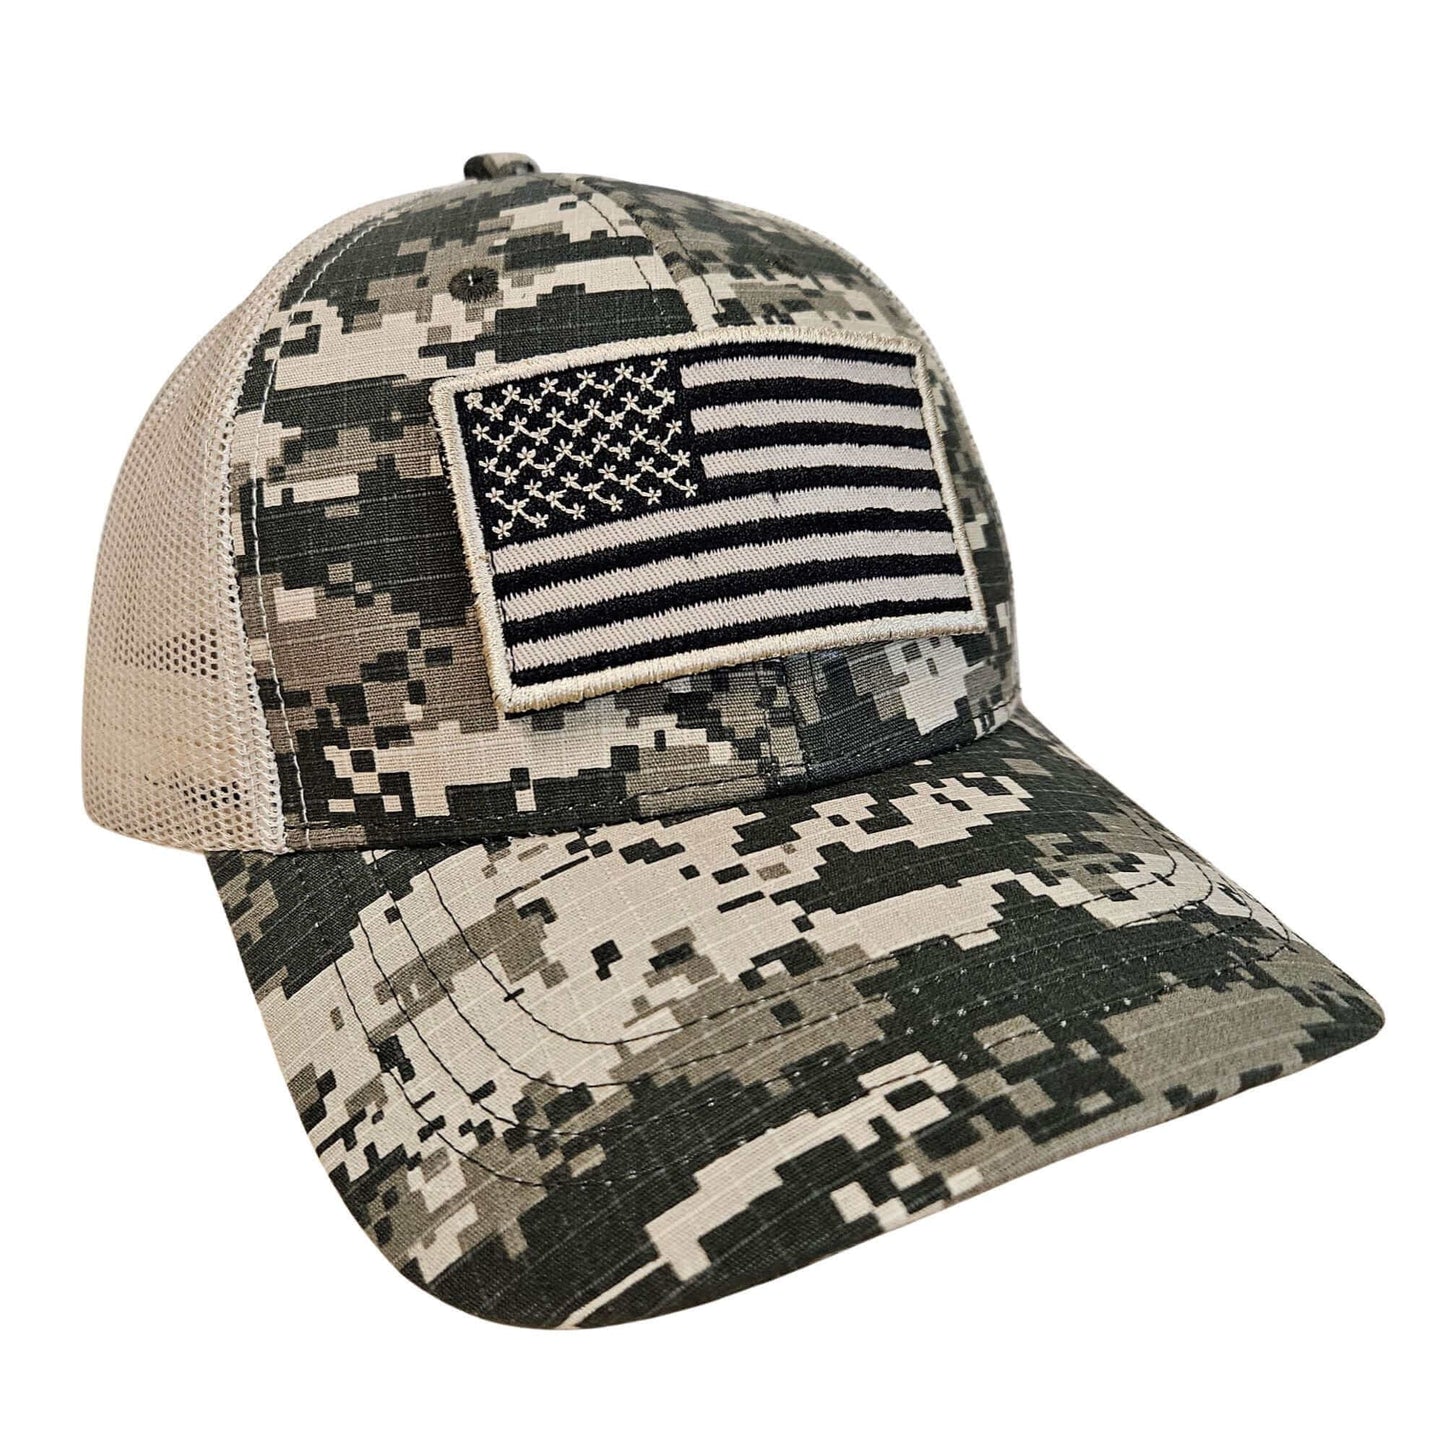 GAC Stop Embroidered US Flag Velcro Patch Baseball Hat Camo Cap